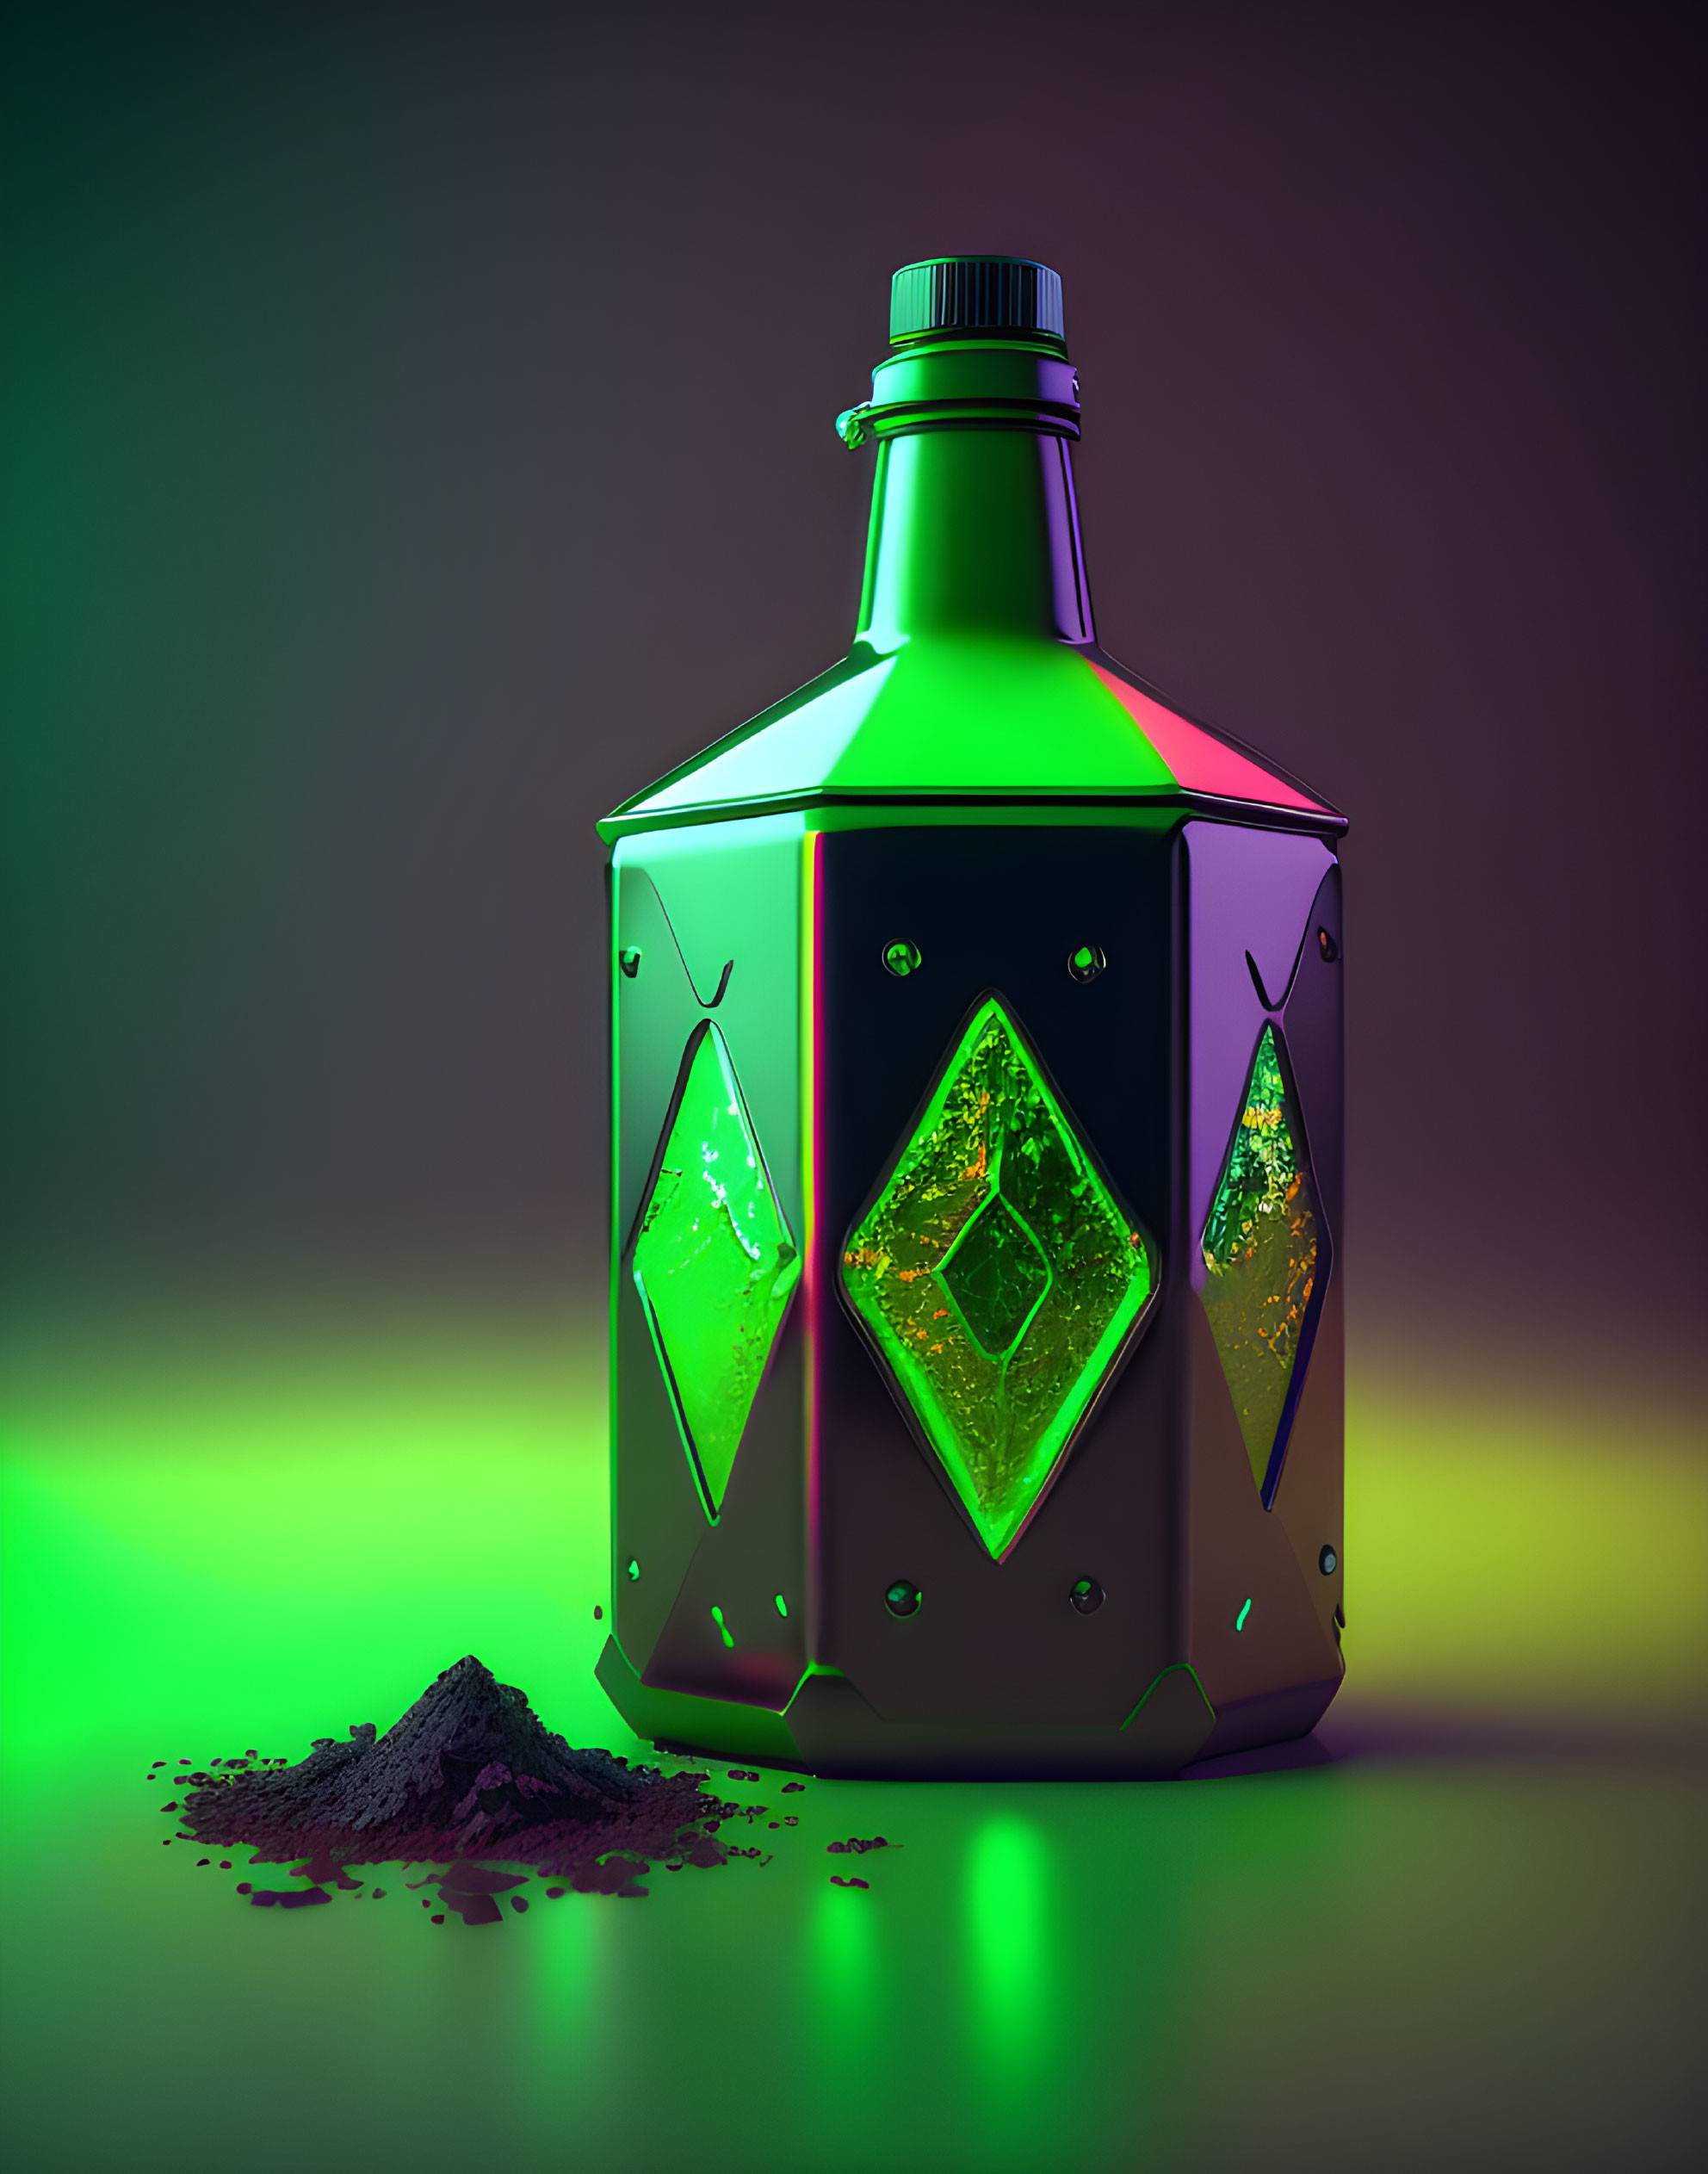 Hexagonal Bottle with Glowing Green Liquid and Mystical Ambiance